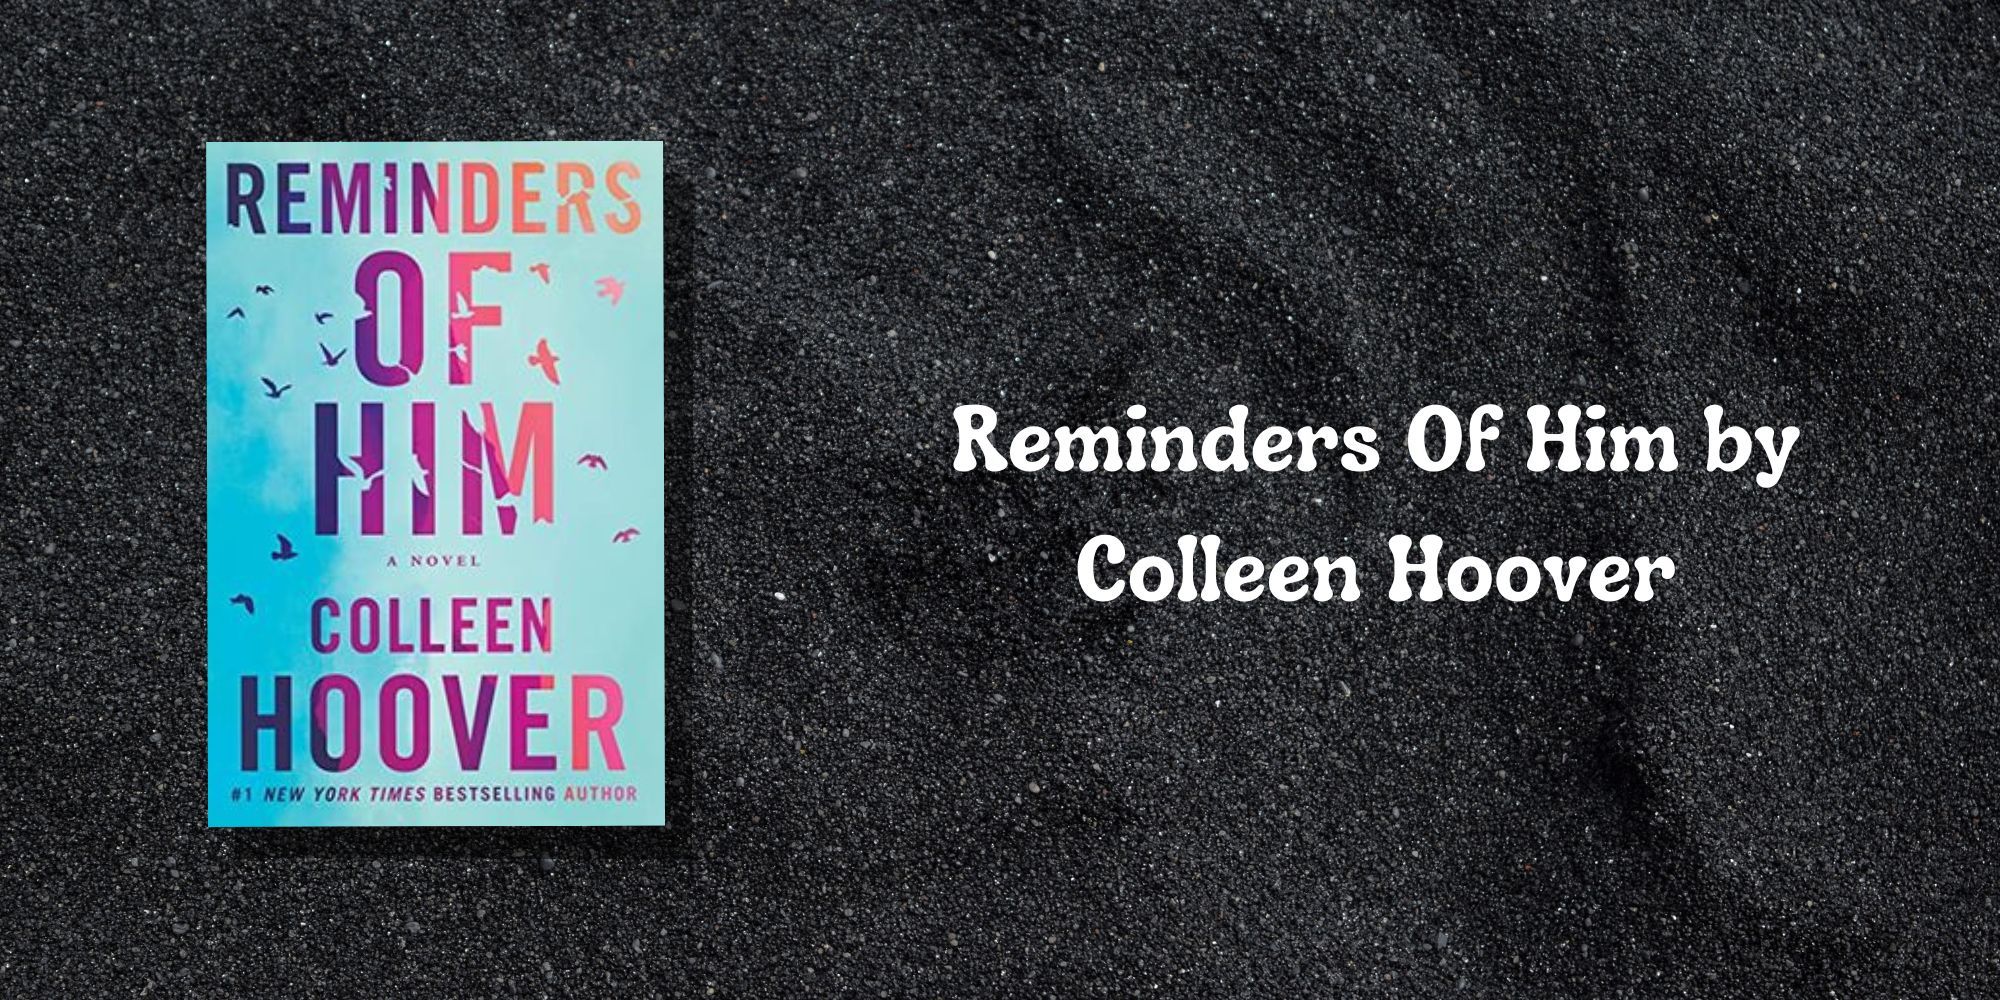 The Cover Of Reminders Of Him by Colleen Hoover